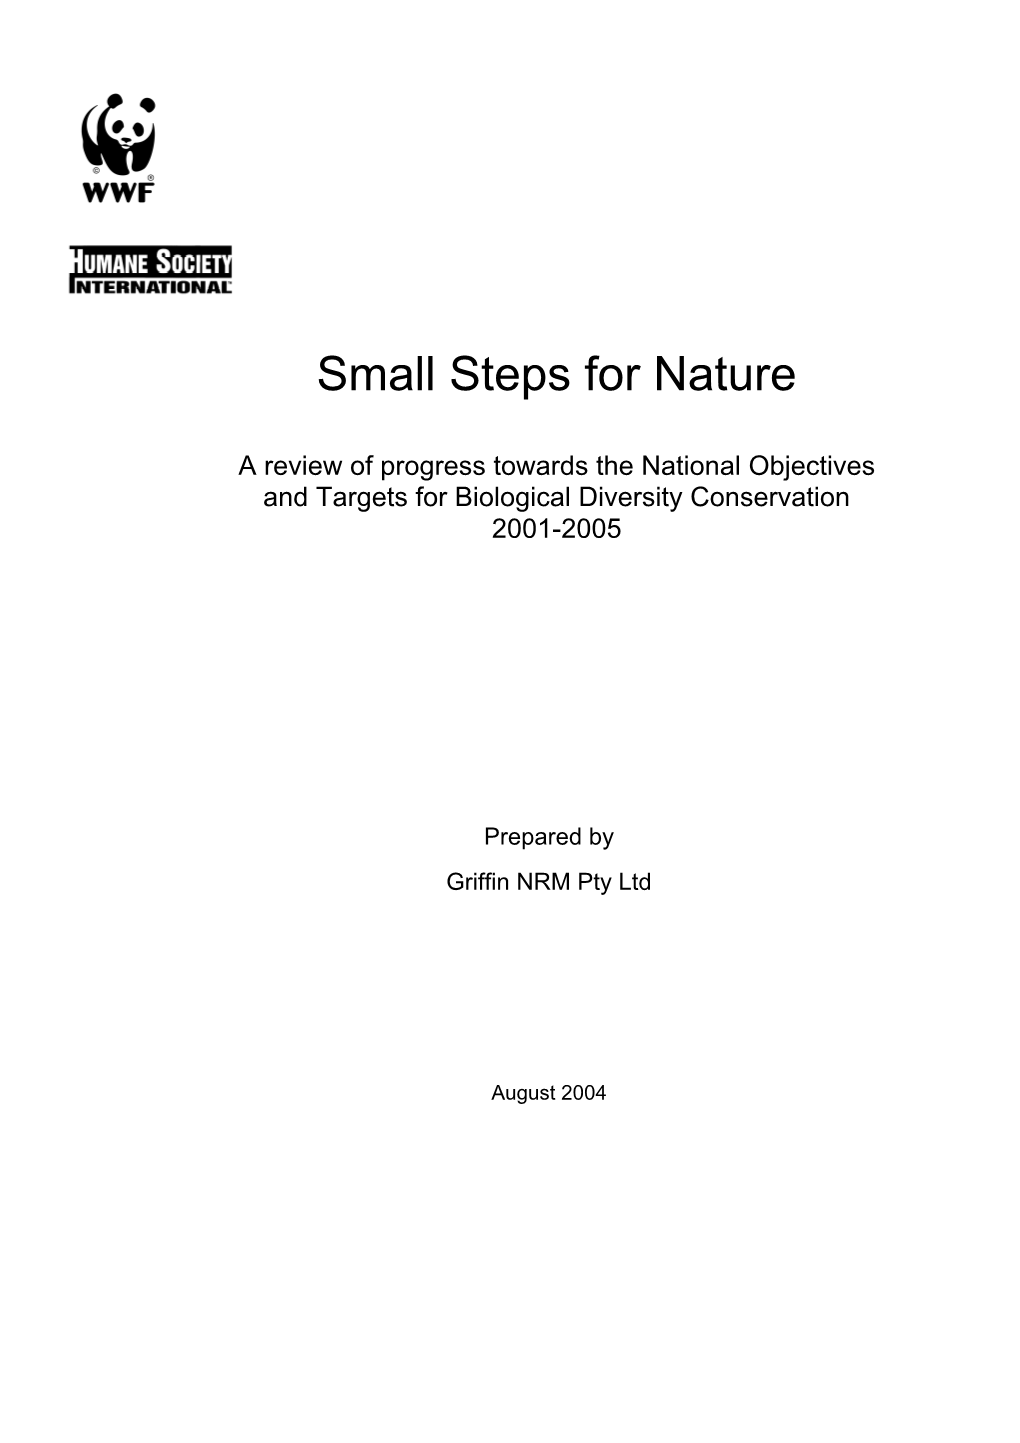 Small Steps for Nature